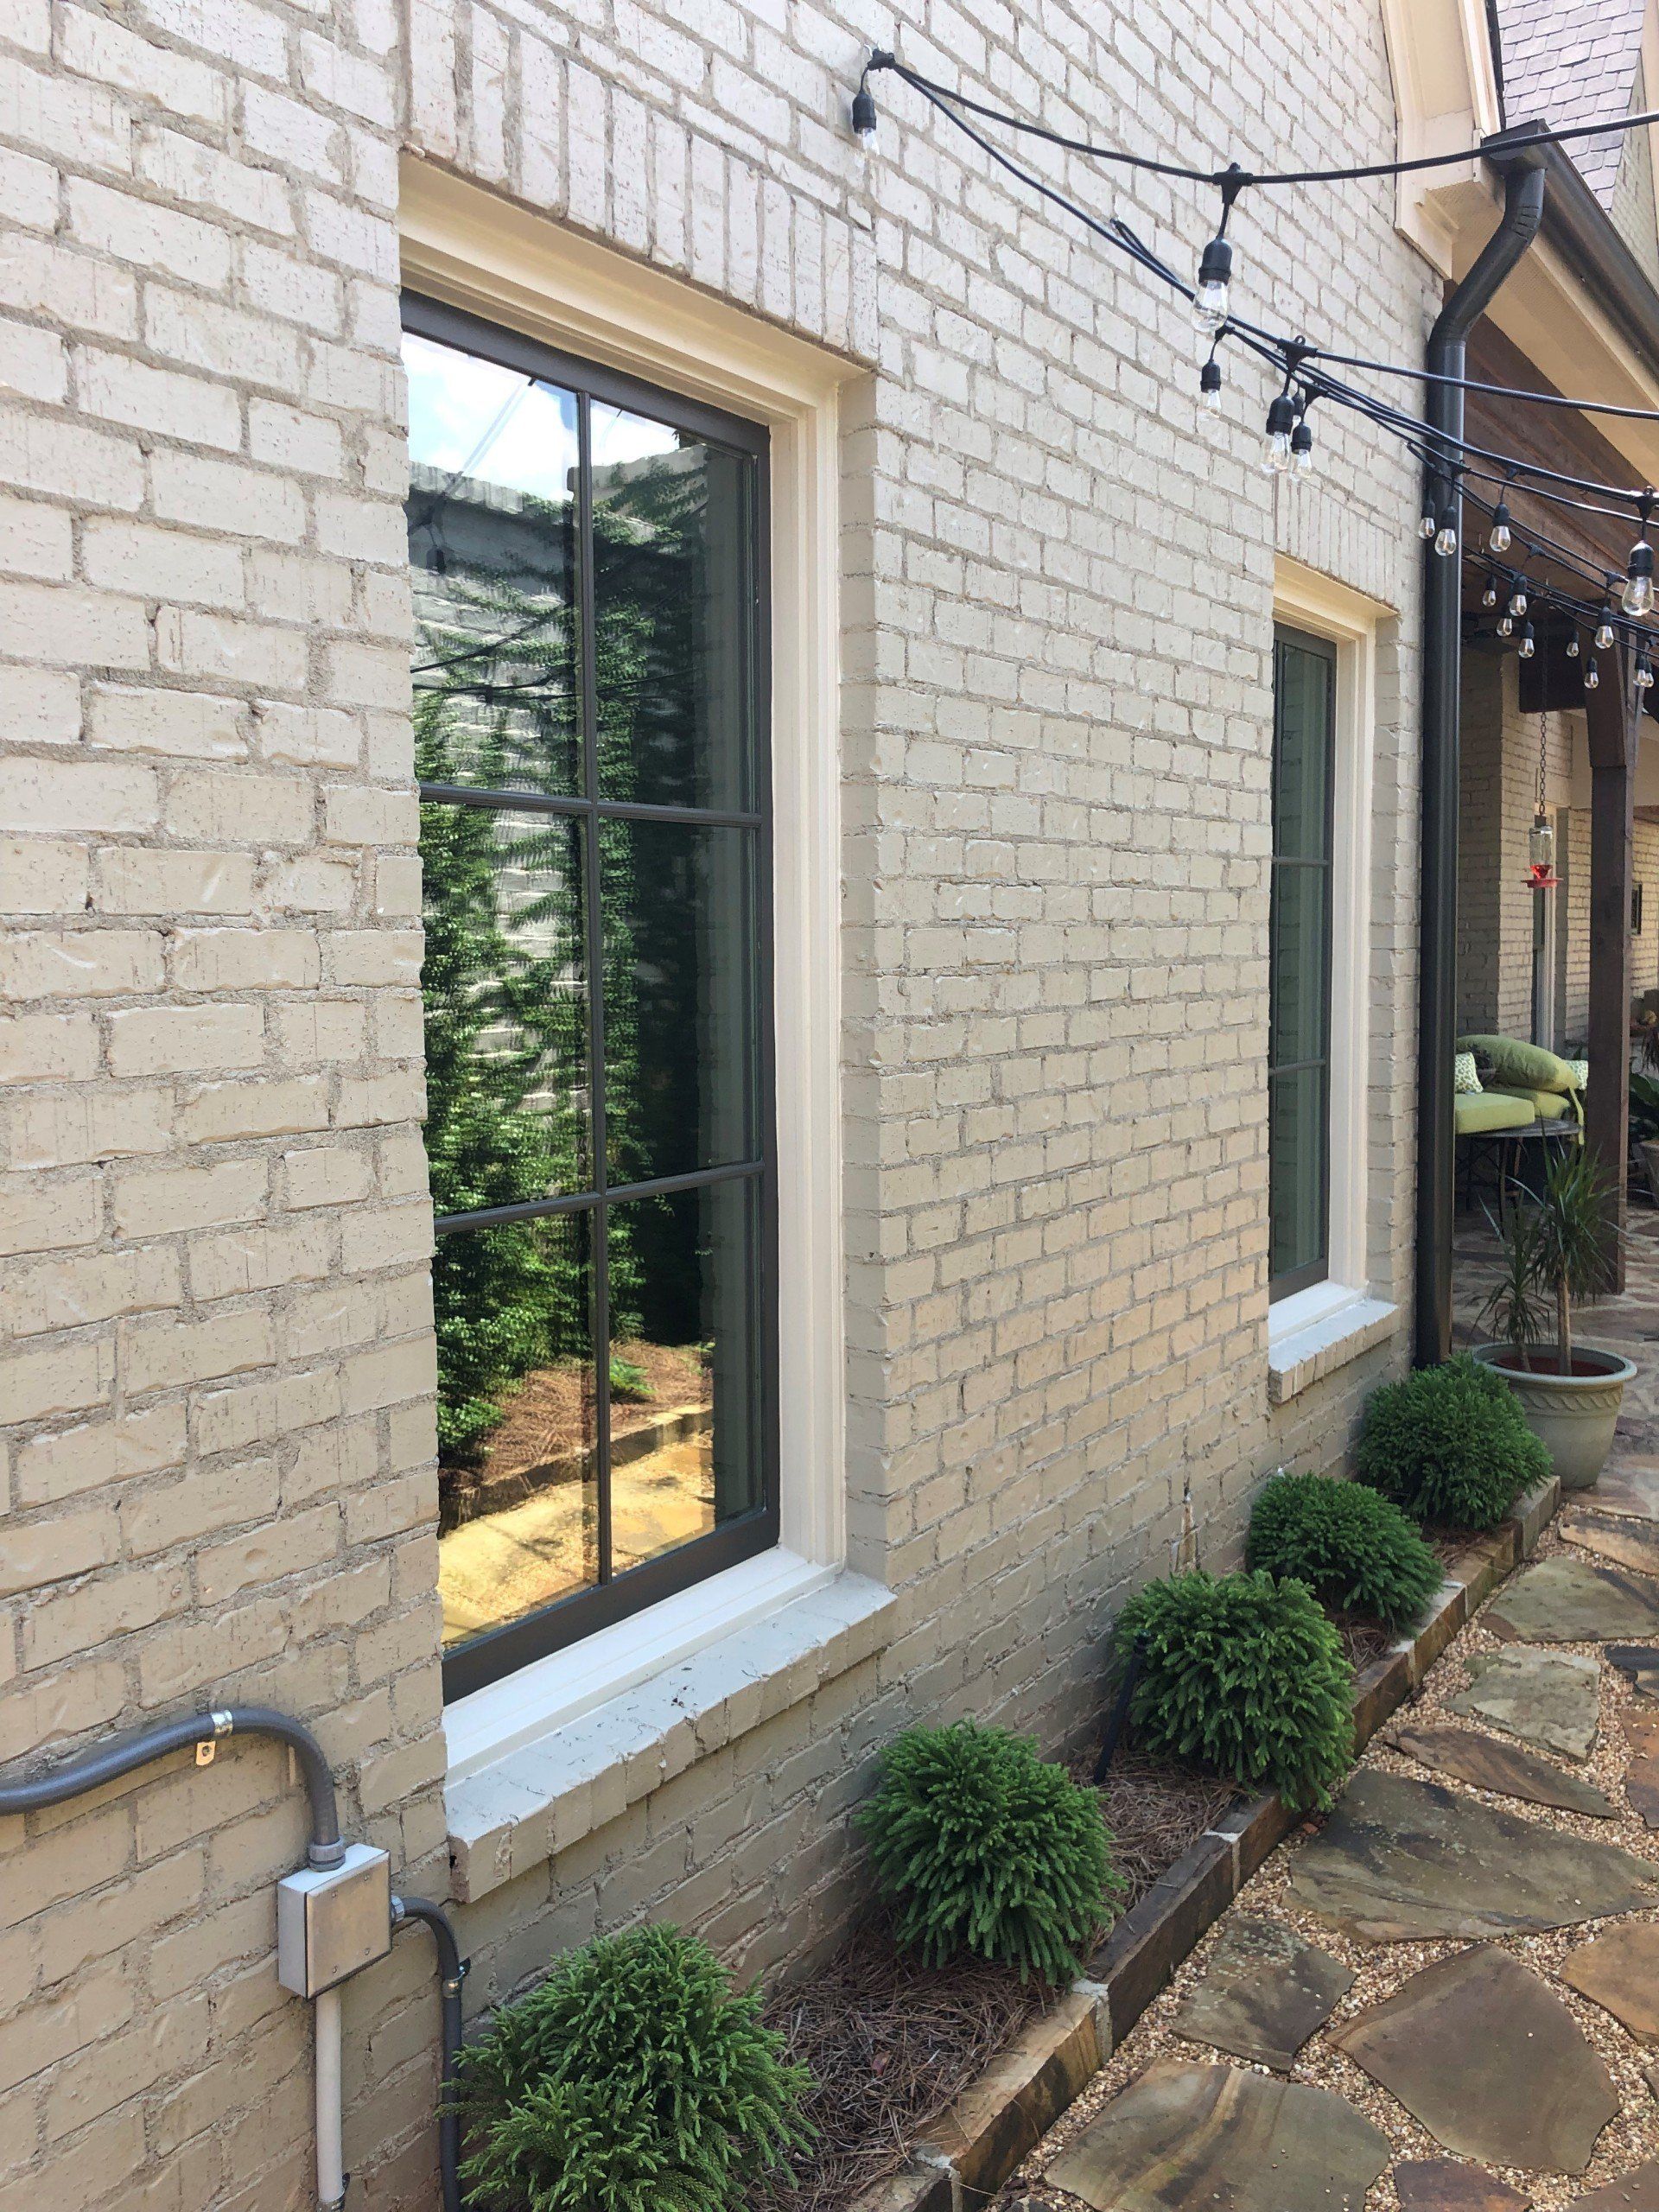 Home tinted on 8.7.2019 - SPF Preferred Tint installation to home windows blocked heat glare UV from home in Birmingham, AL